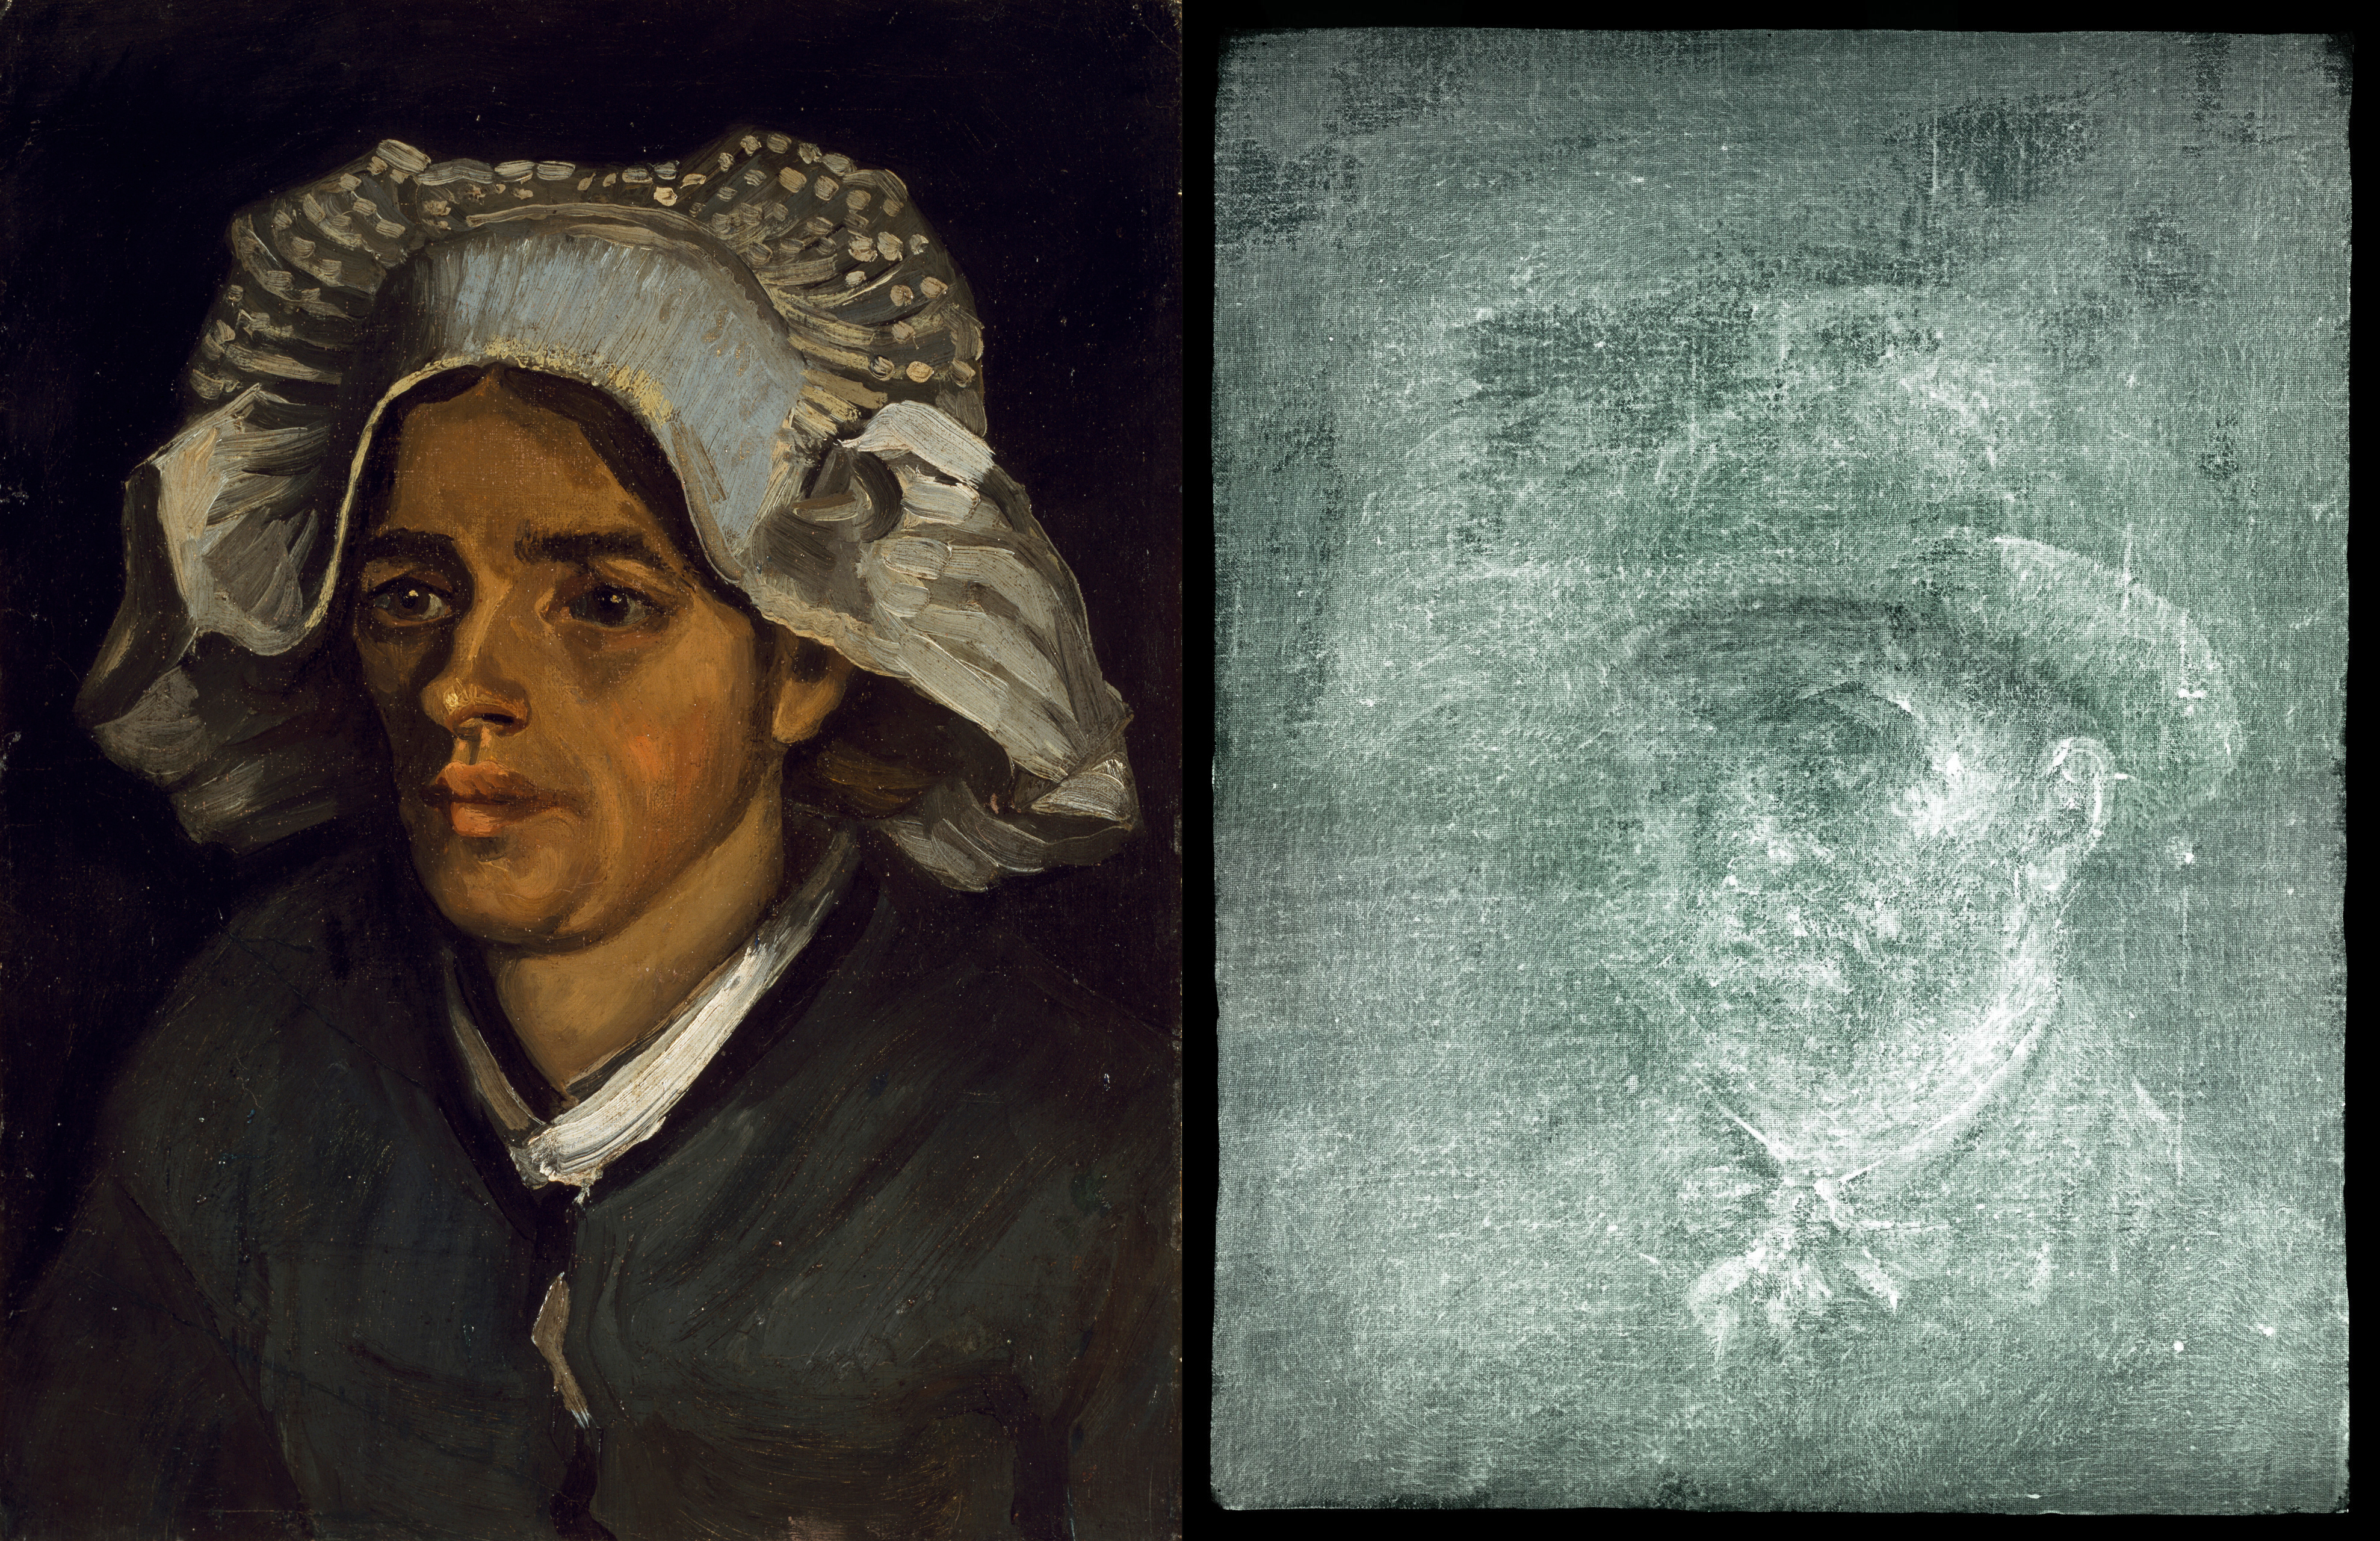 Left, Van Gogh’s ‘Head of a Peasant Woman,’ Right, the X-ray image of the newly rediscovered Van Gogh self-portrait that lies beneath it. Courtesy of the National Galleries of Scotland